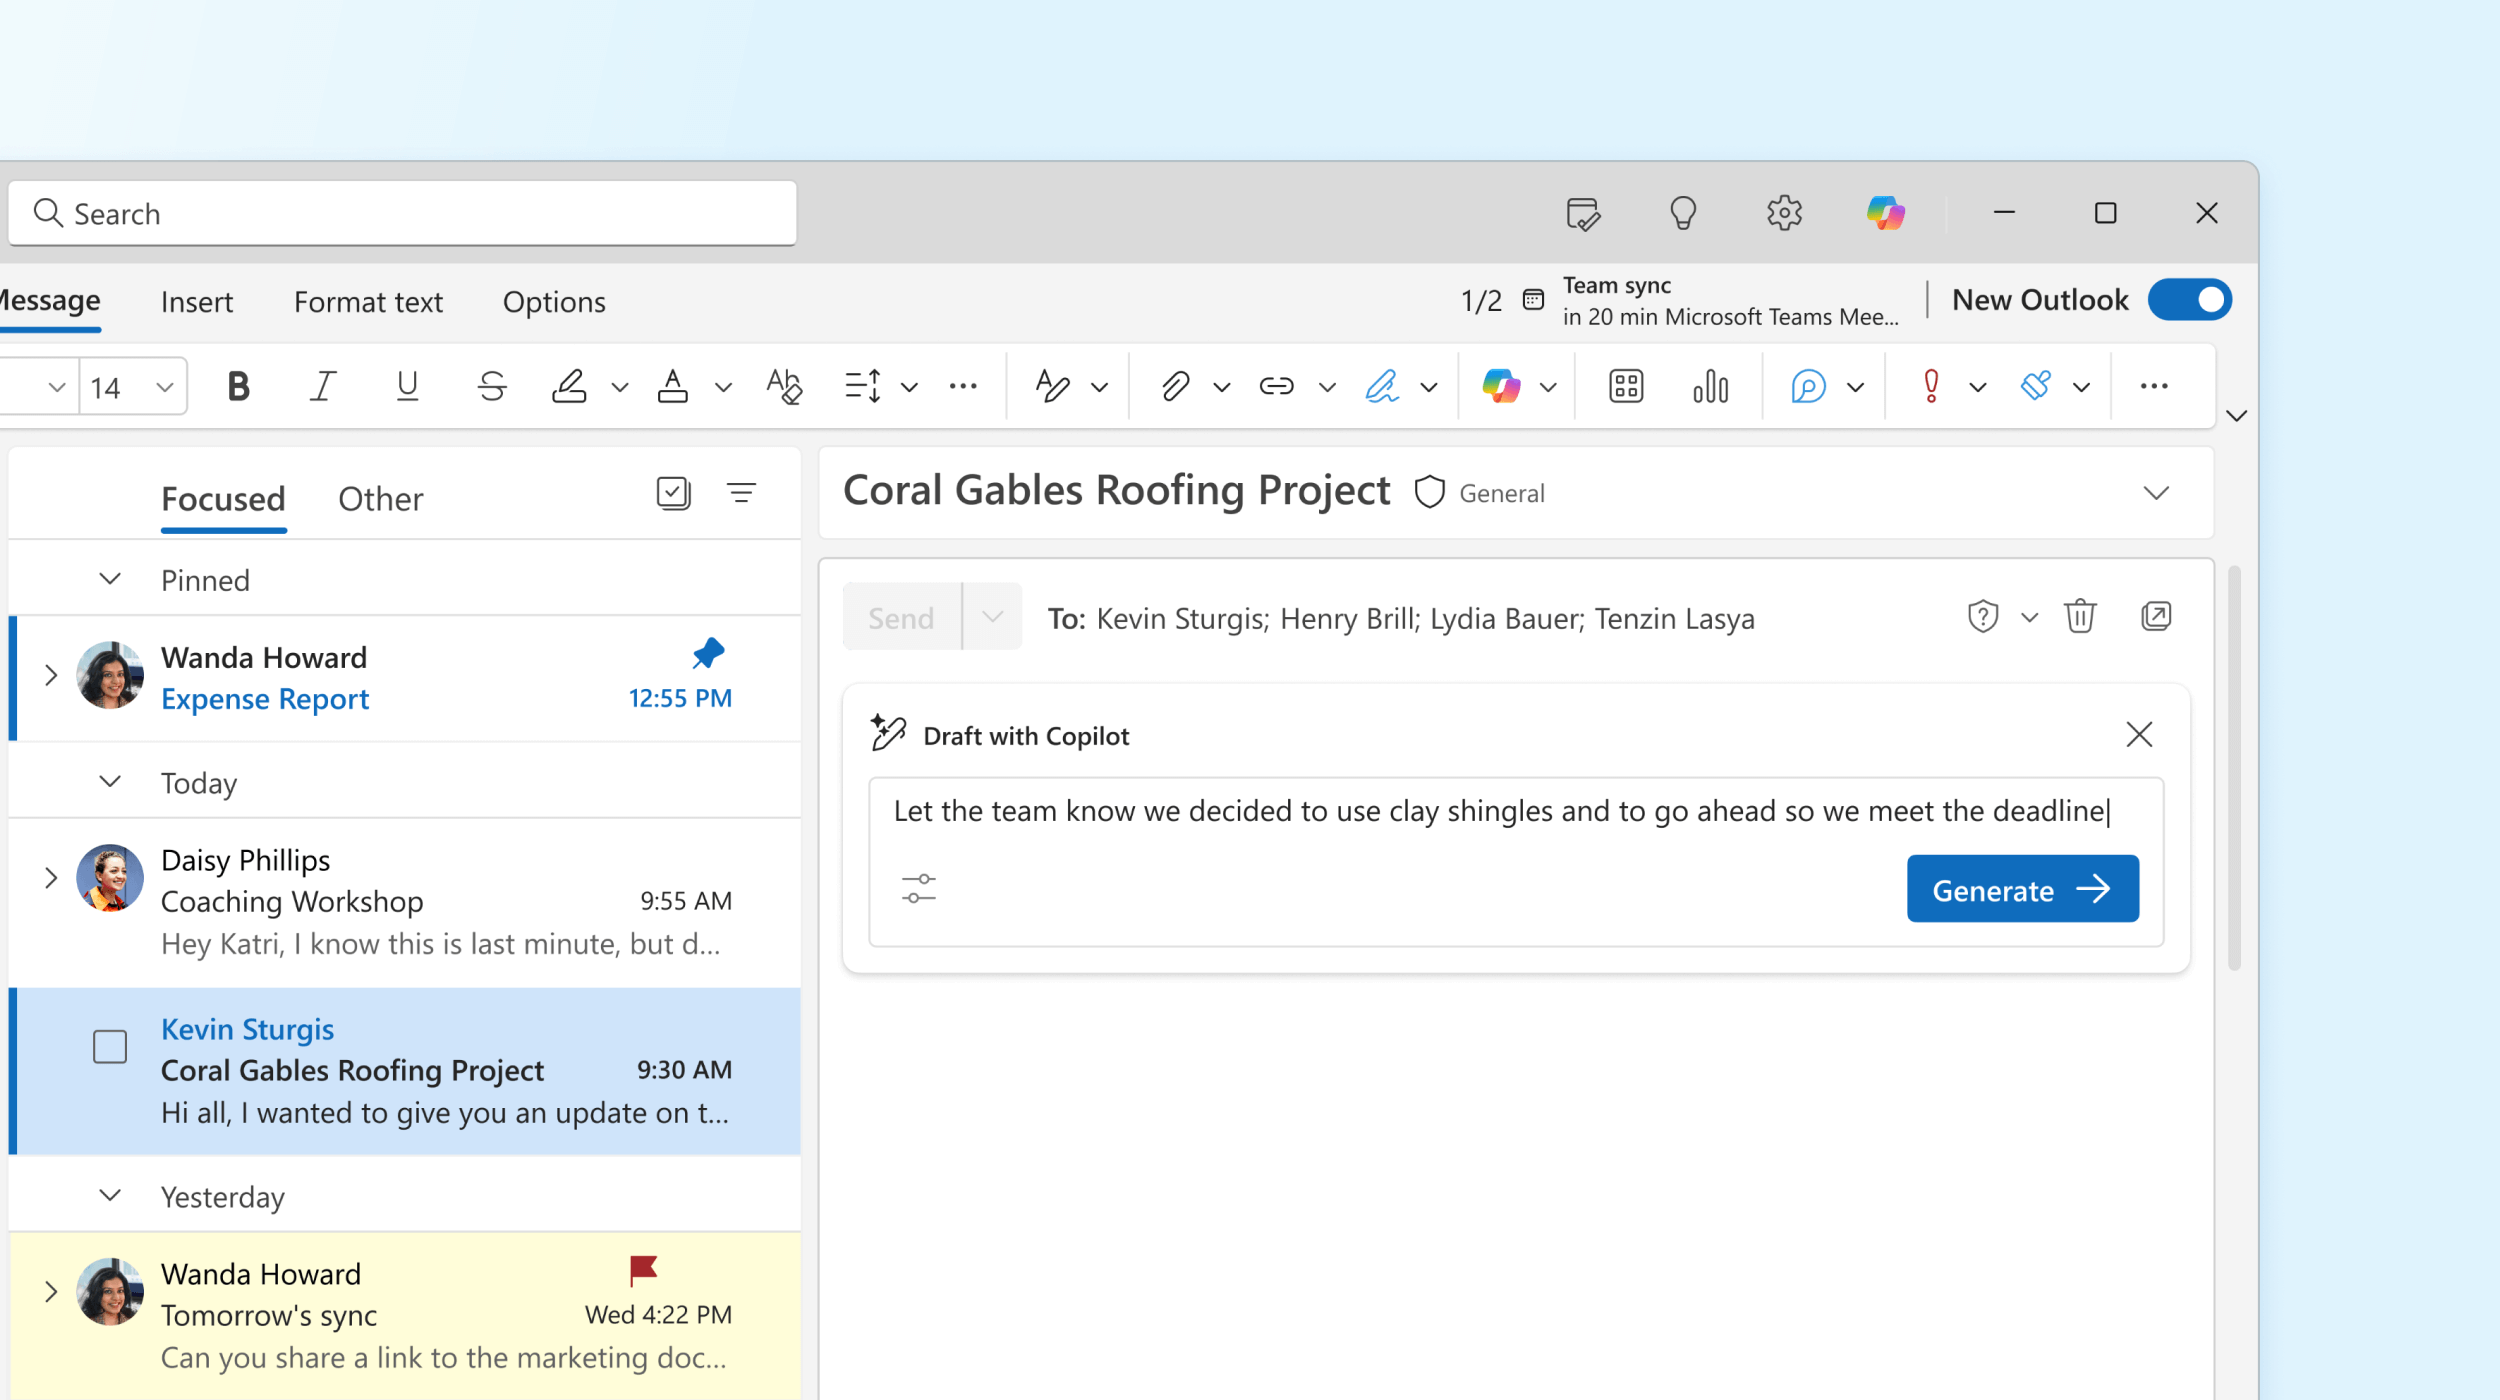 Using Copilot to generate an email